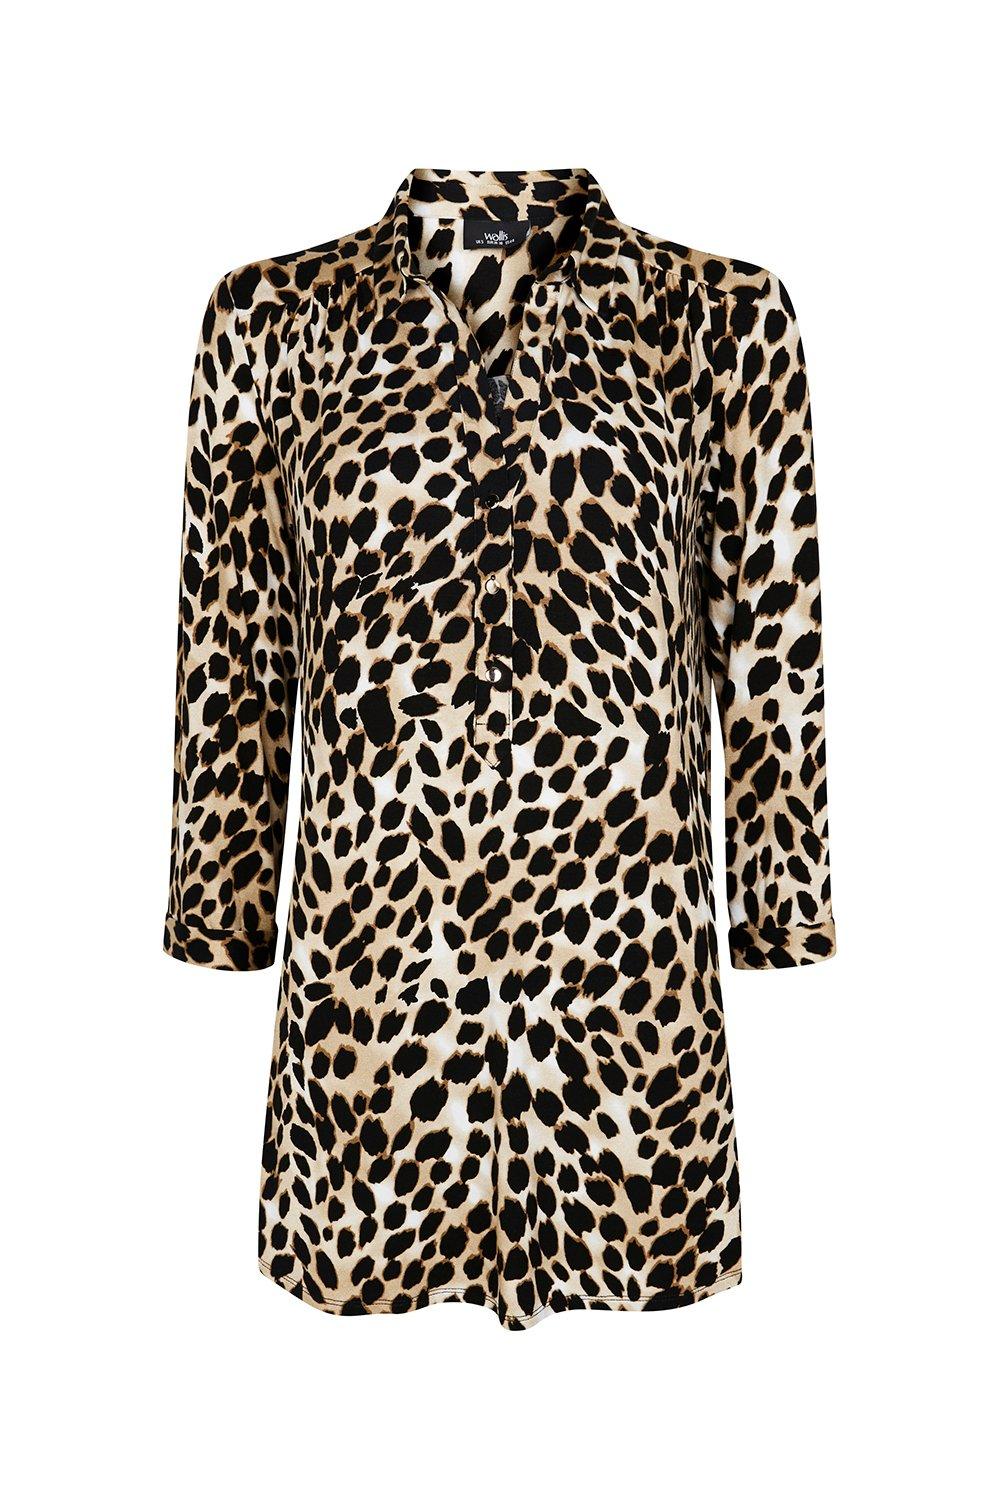 Get Instant Style With This On-Trend Animal Print Top. Animal Print Detailing Is A Must-Have For This Season, Whilst A Relaxed Fit And Versatile Design Will Have You Wearing This Top On-Repeat. Team With Black Skinny Jeans And Heels For The Perfect Evenin